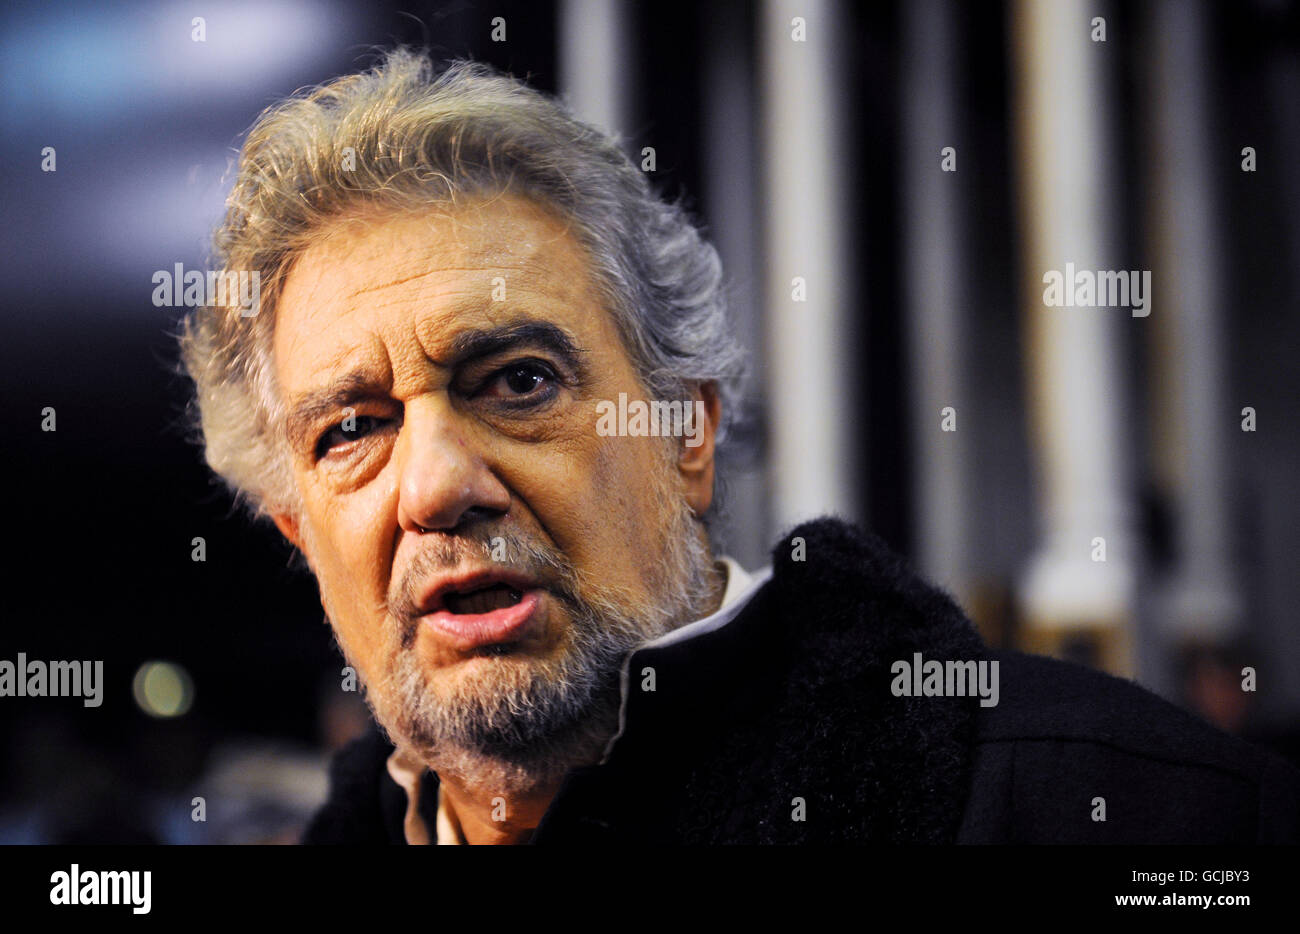 Placido Domingo backstage after, after performing in Verdi's Simon Boccanegra at the Royal Opera House in London - his 225th performance at the famous venue. The Spanish tenor sung in barritone, as demanded by the role. PRESS ASSOCIATION Photo. Picture date: Tuesday June 29, 2010. Photo credit should read: Fiona Hanson/PA Wire Stock Photo